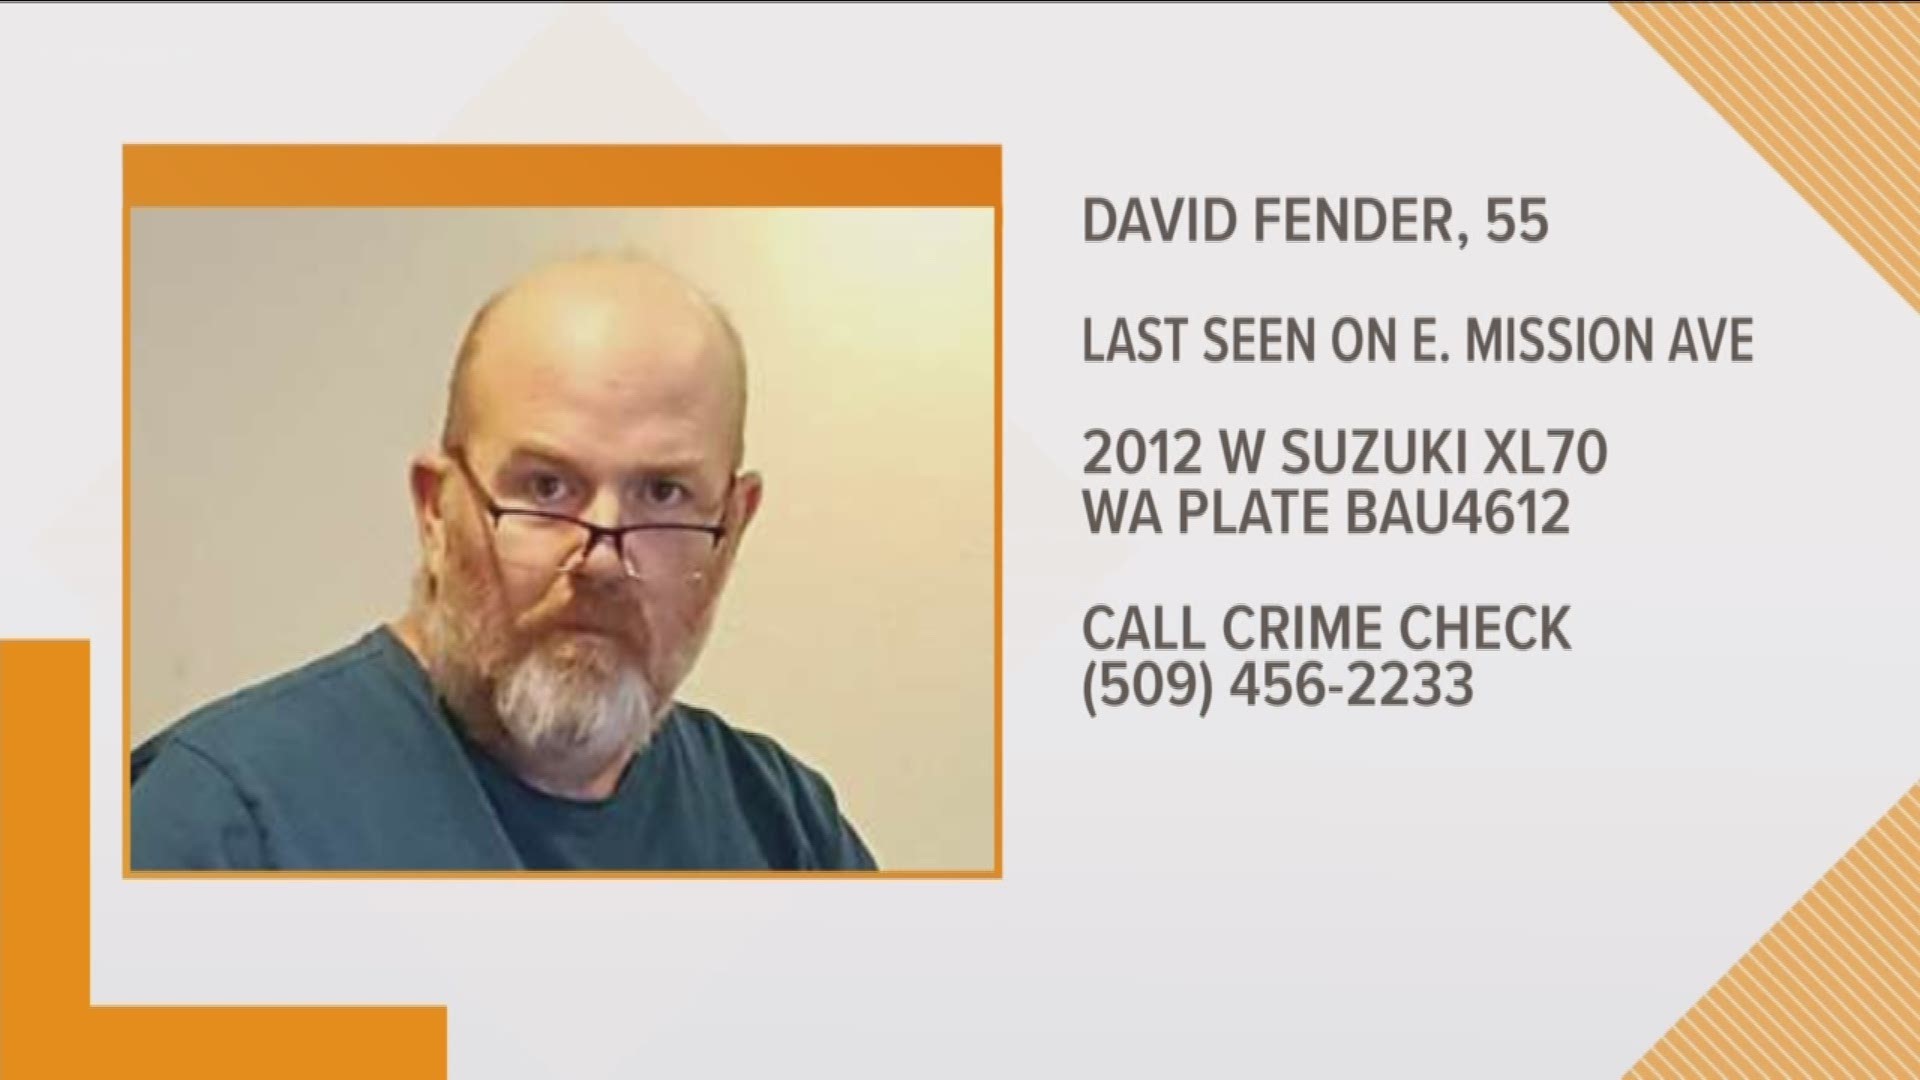 Police said David Fender, 55, has medical issues that affect his memory and cognition. He was last seen Thursday night.